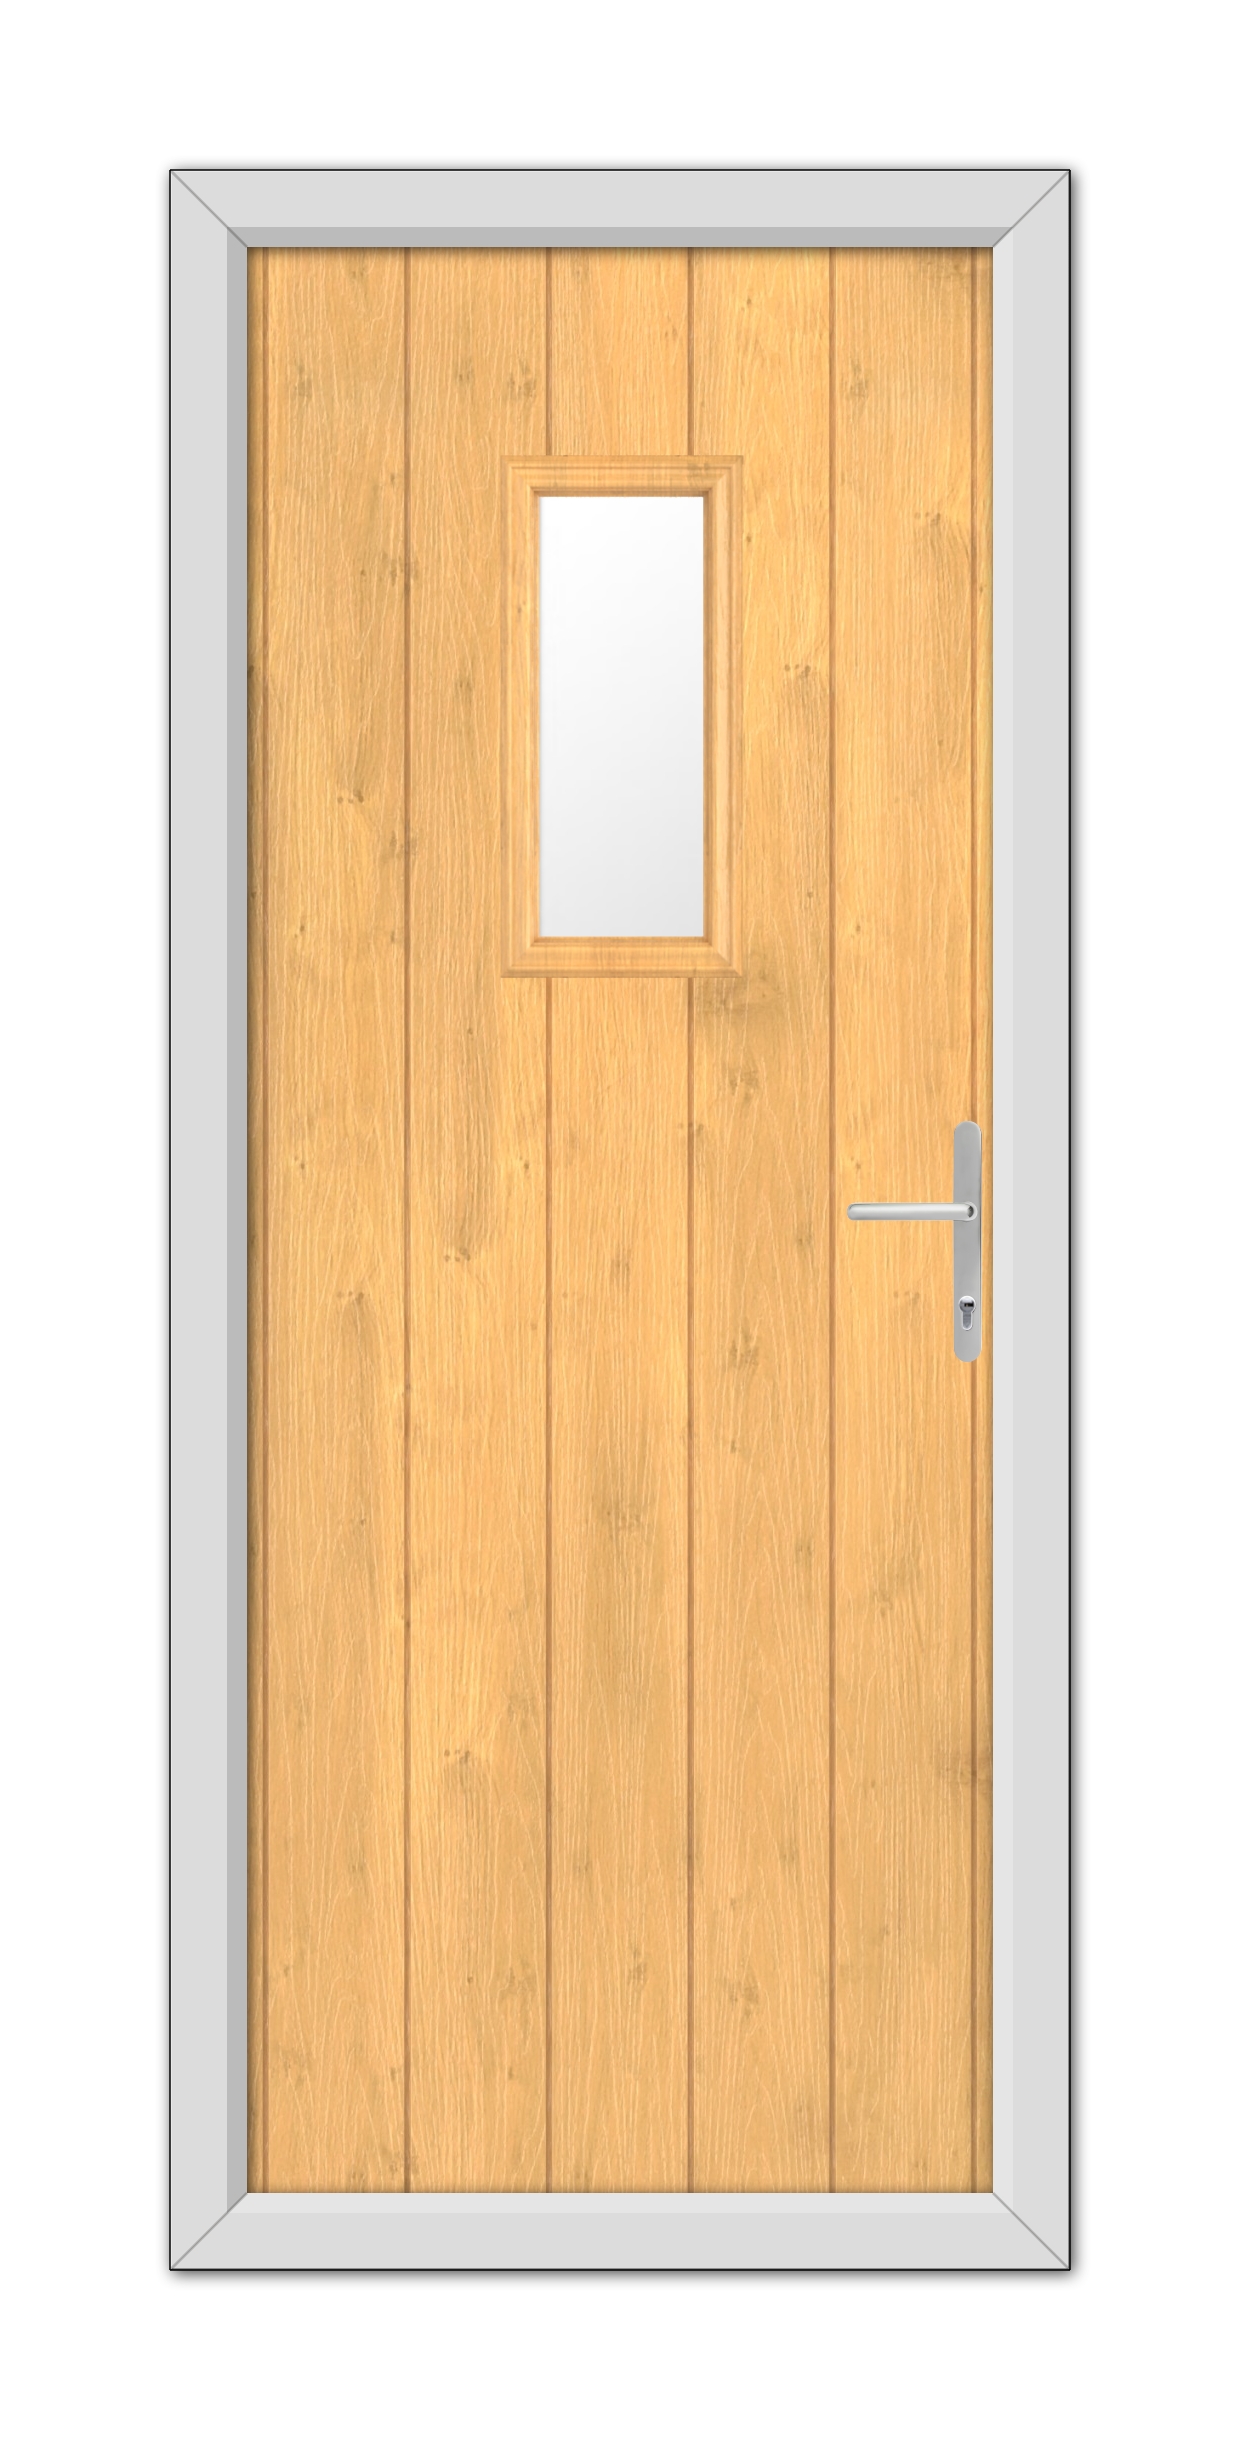 An Irish Oak Somerset Composite Door with a small square window and a metal handle, framed by a grey border.